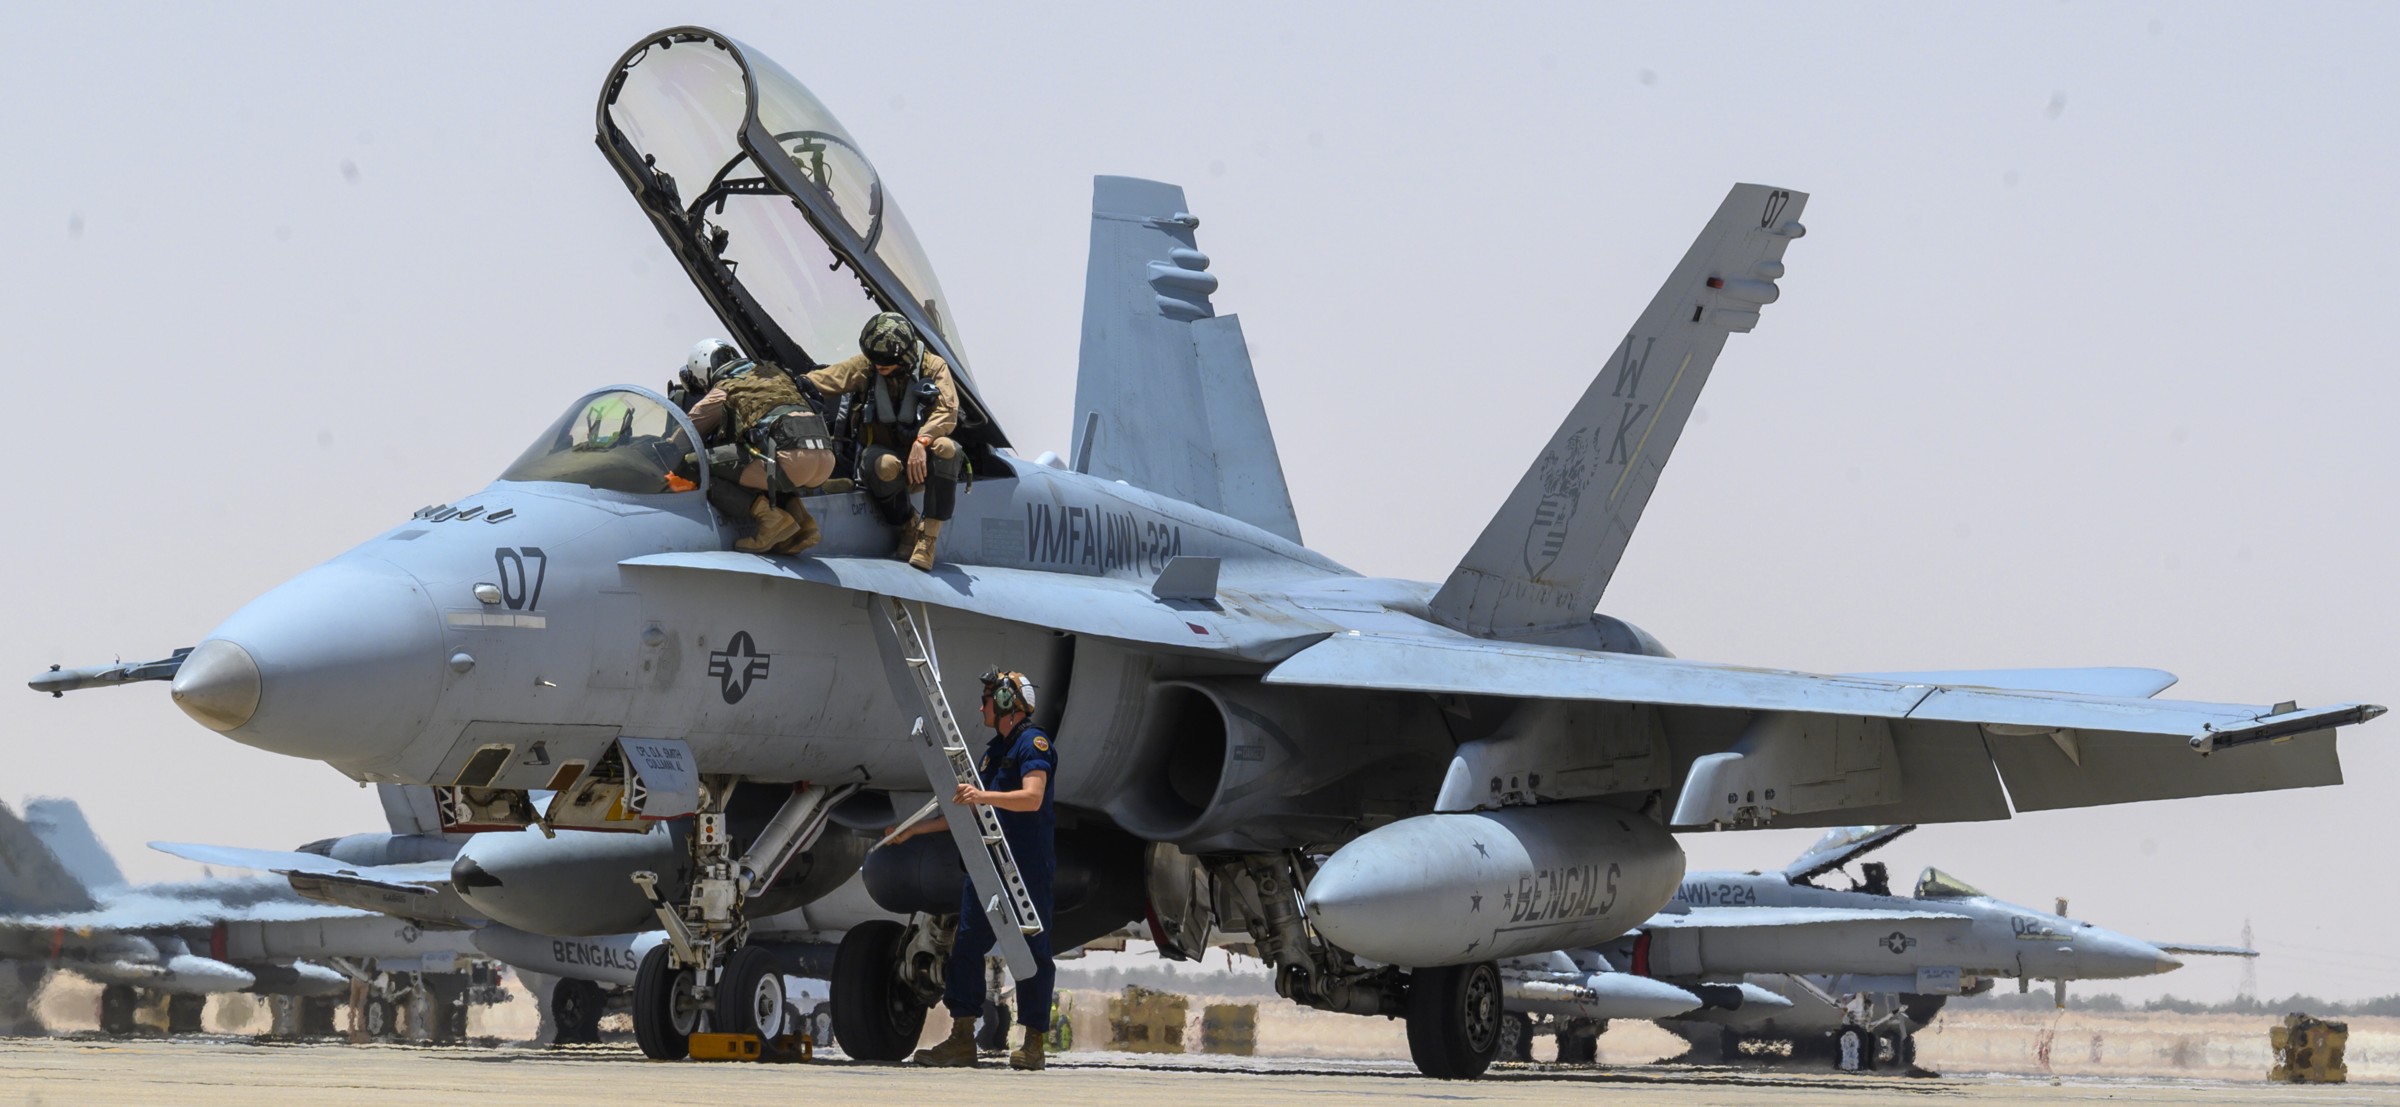 vmfa(aw)-224 bengals marine fighter attack squadron usmc f/a-18d hornet 108 prince sultan airbase